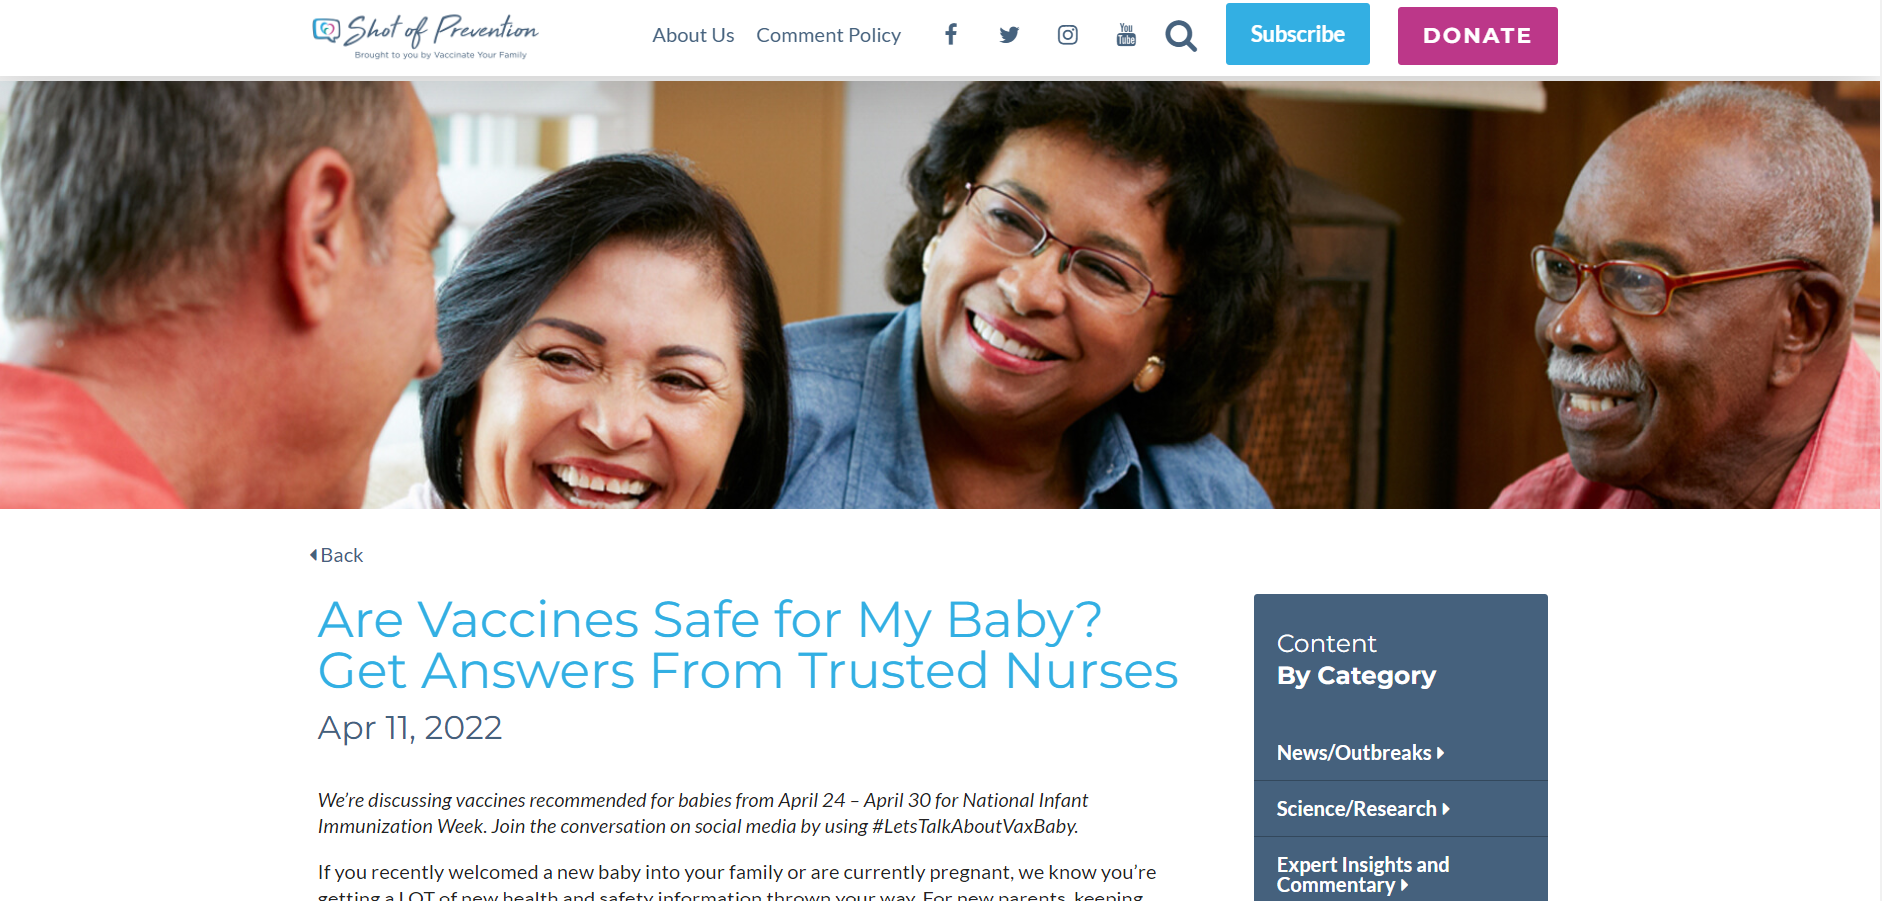 Screenshot of webpage titled "Are Vaccines Safe for My Baby? Get Answers From Trusted Nurses"